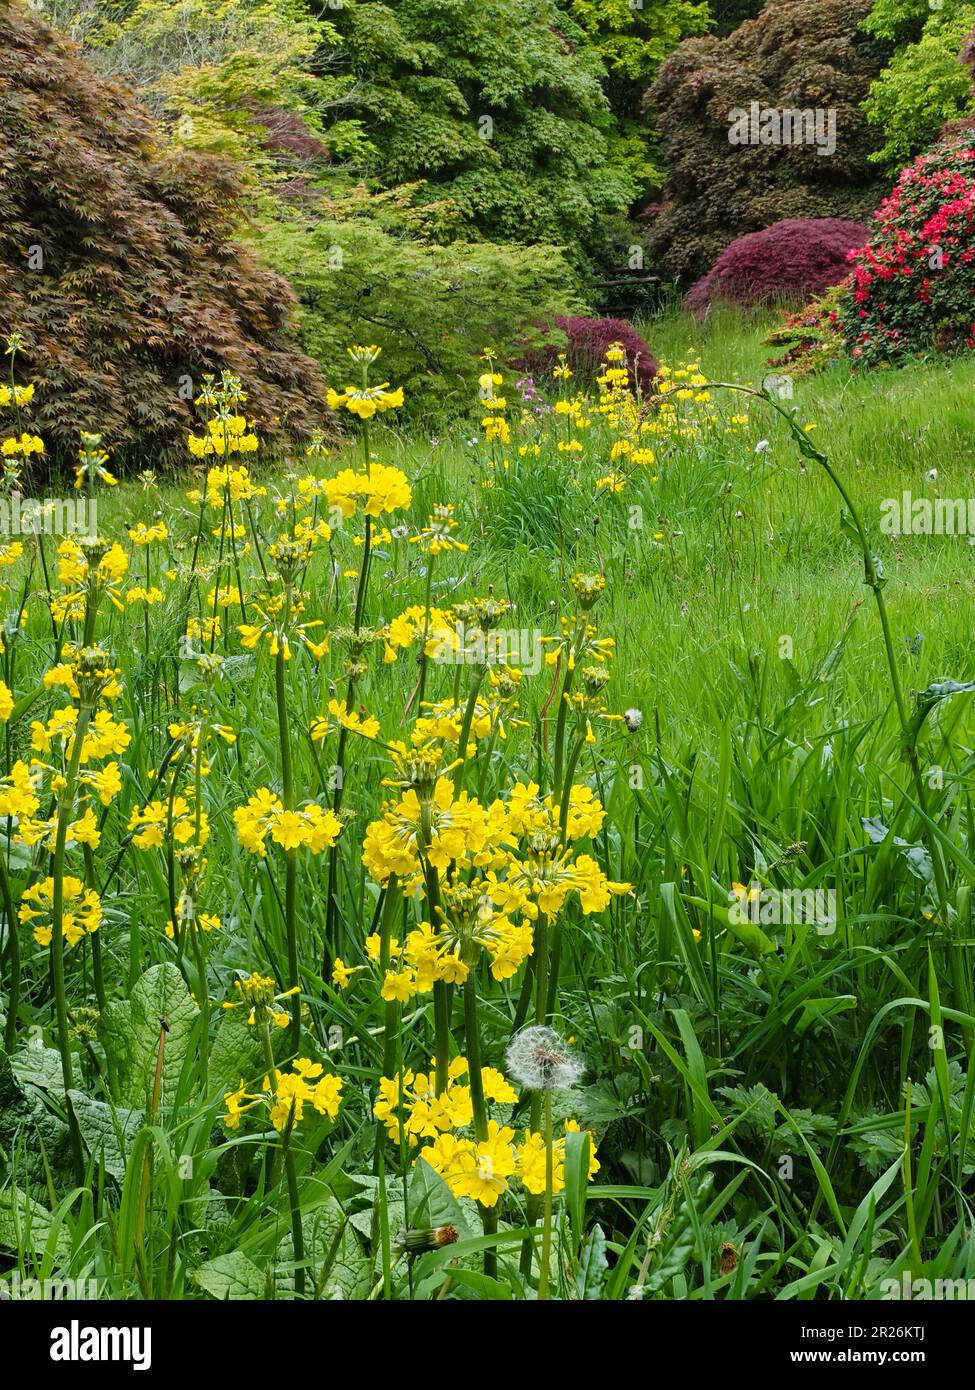 Stands of the hardy yellow candelabra primula, Primula helodoxa, line a small rill at The Garden House, Buckland Monachorum, UK Stock Photo